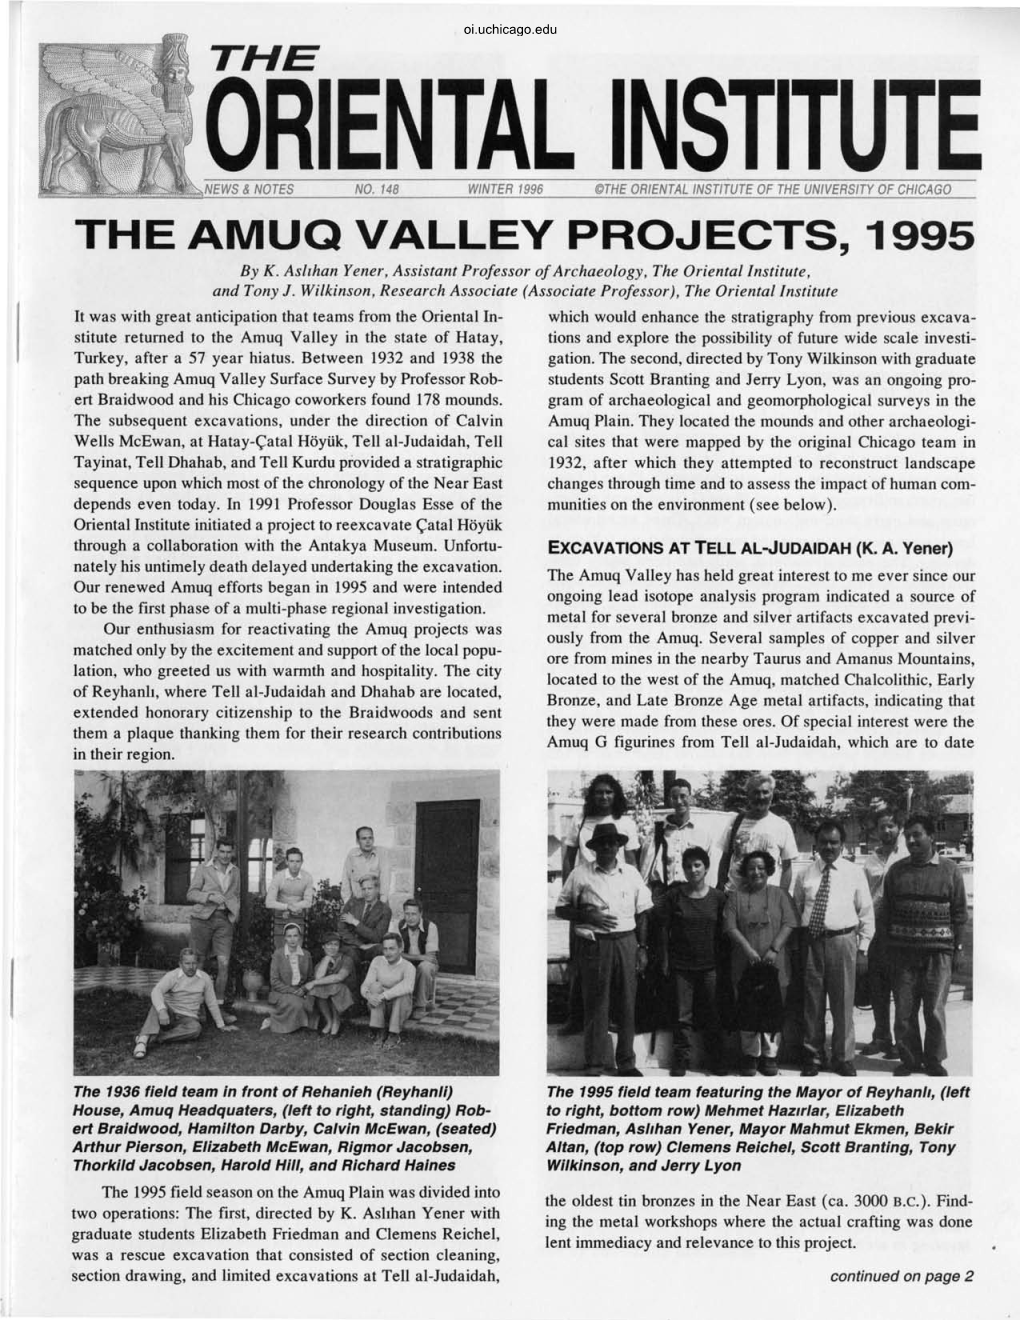 THE AMUQ VALLEY PROJECTS, 1995 by K